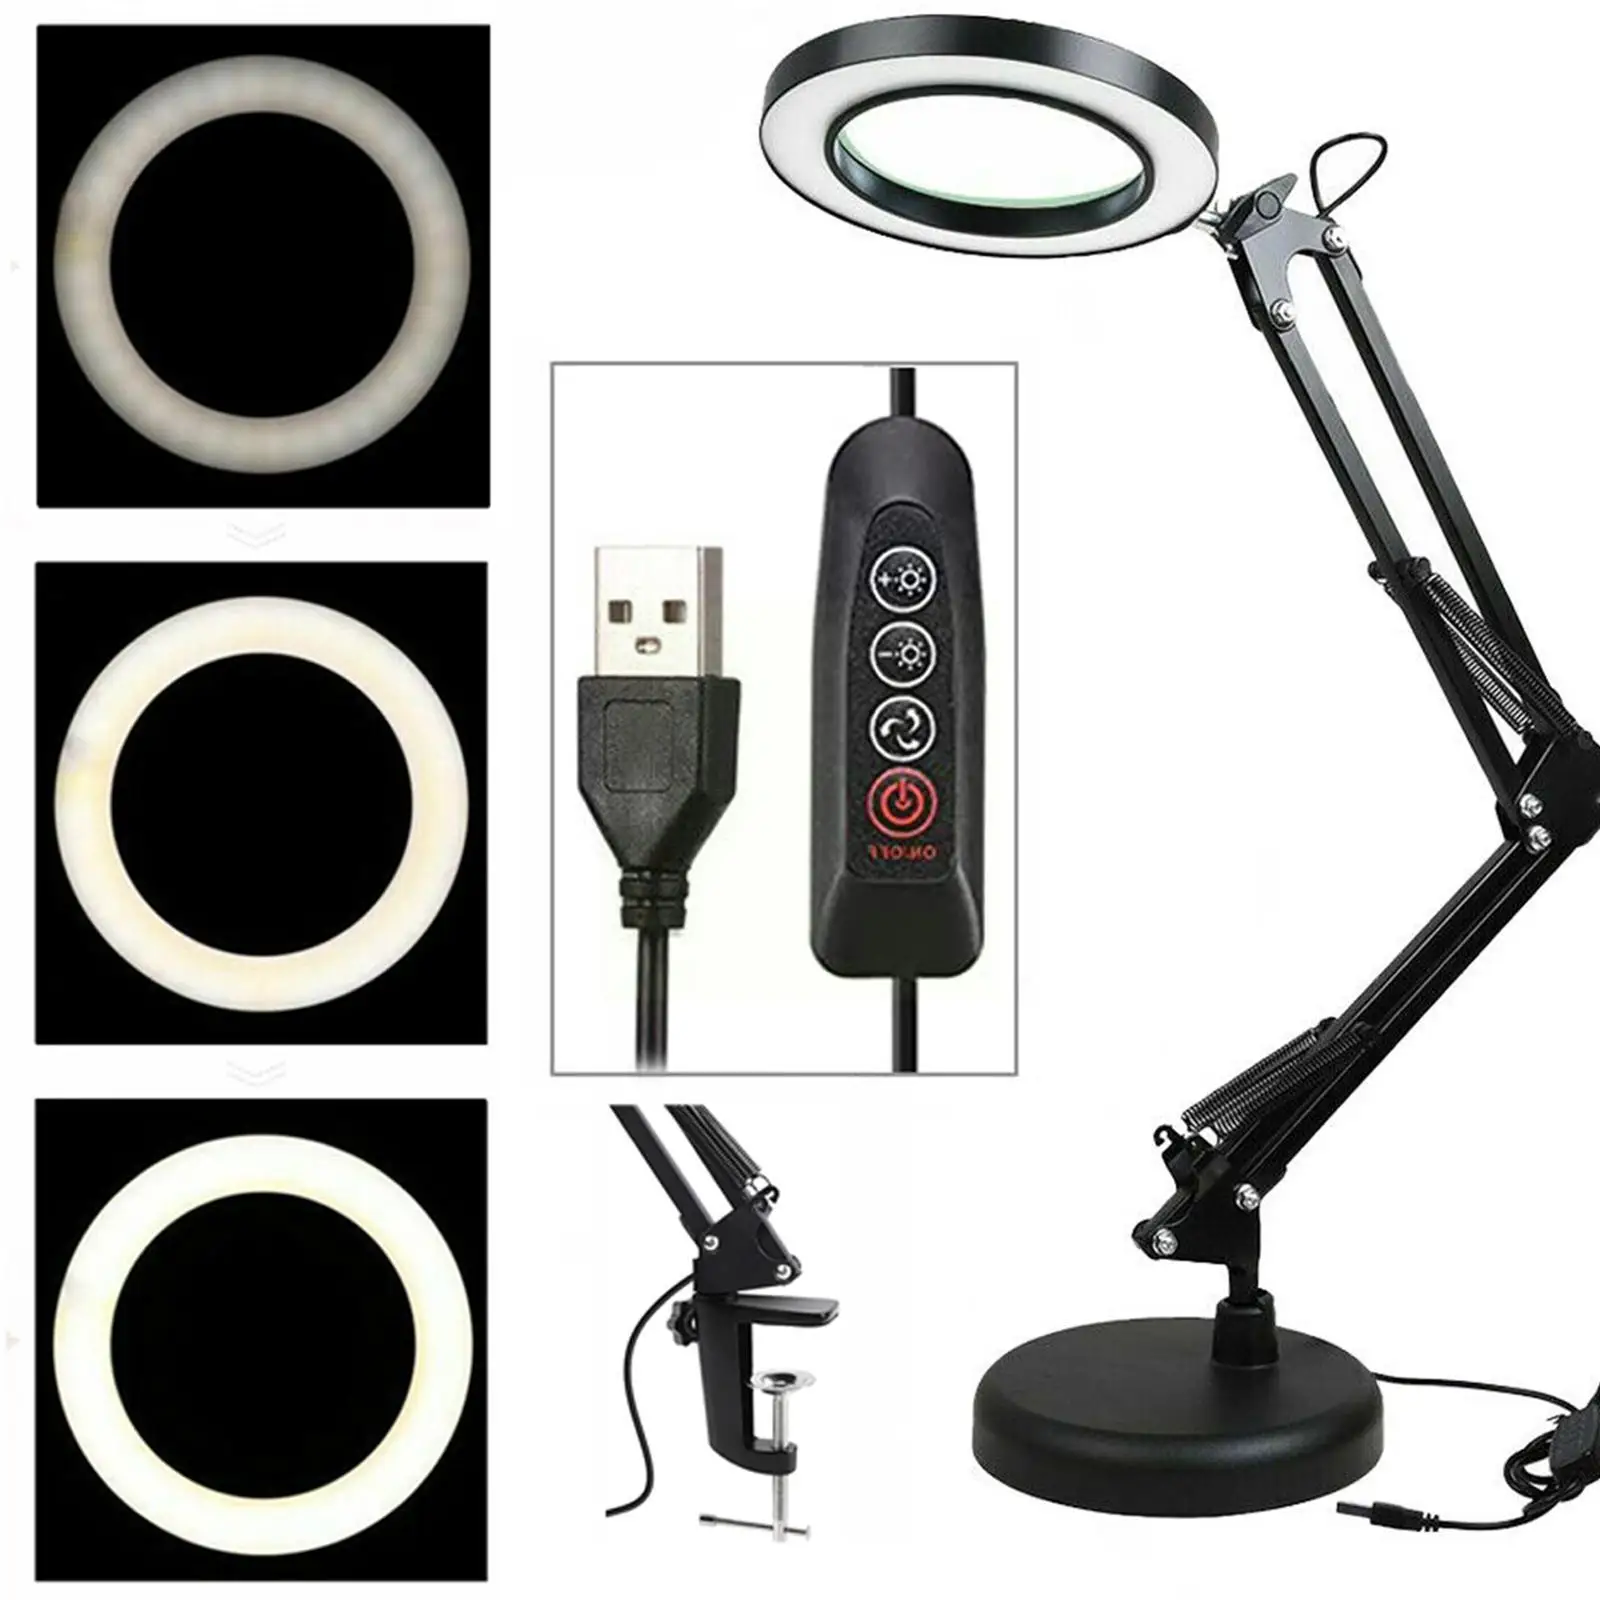 

Metal Magnifier Table Lamp 2.25X Magnifier Glass Flexible Color Illuminated Arm 3 Clamp-on Light Dimmable LED Swing Desk I2G6